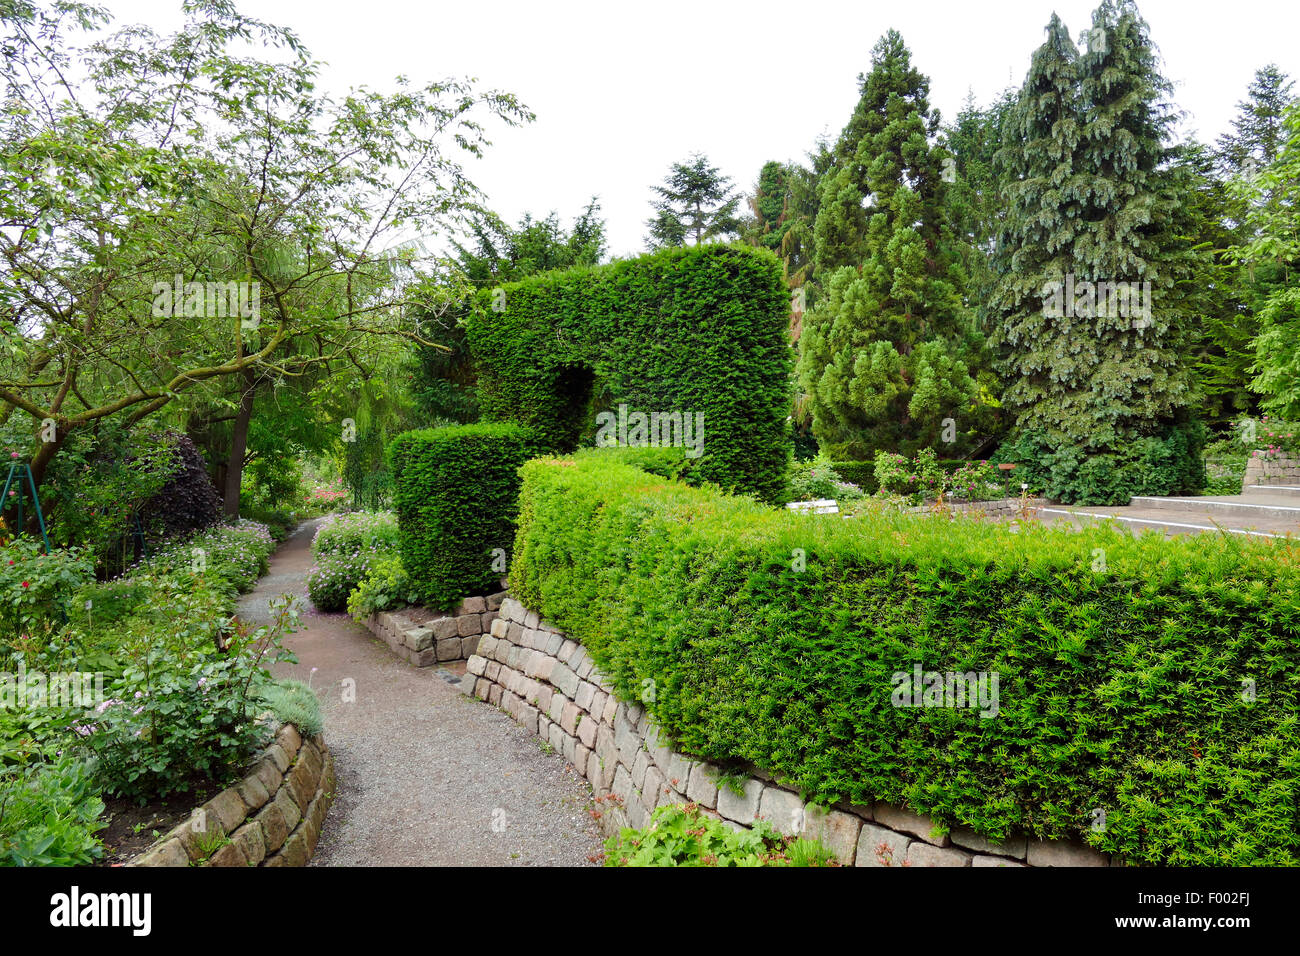 Common yew, English yew, European yew (Taxus baccata), hedges in a landscape park, Germany Stock Photo